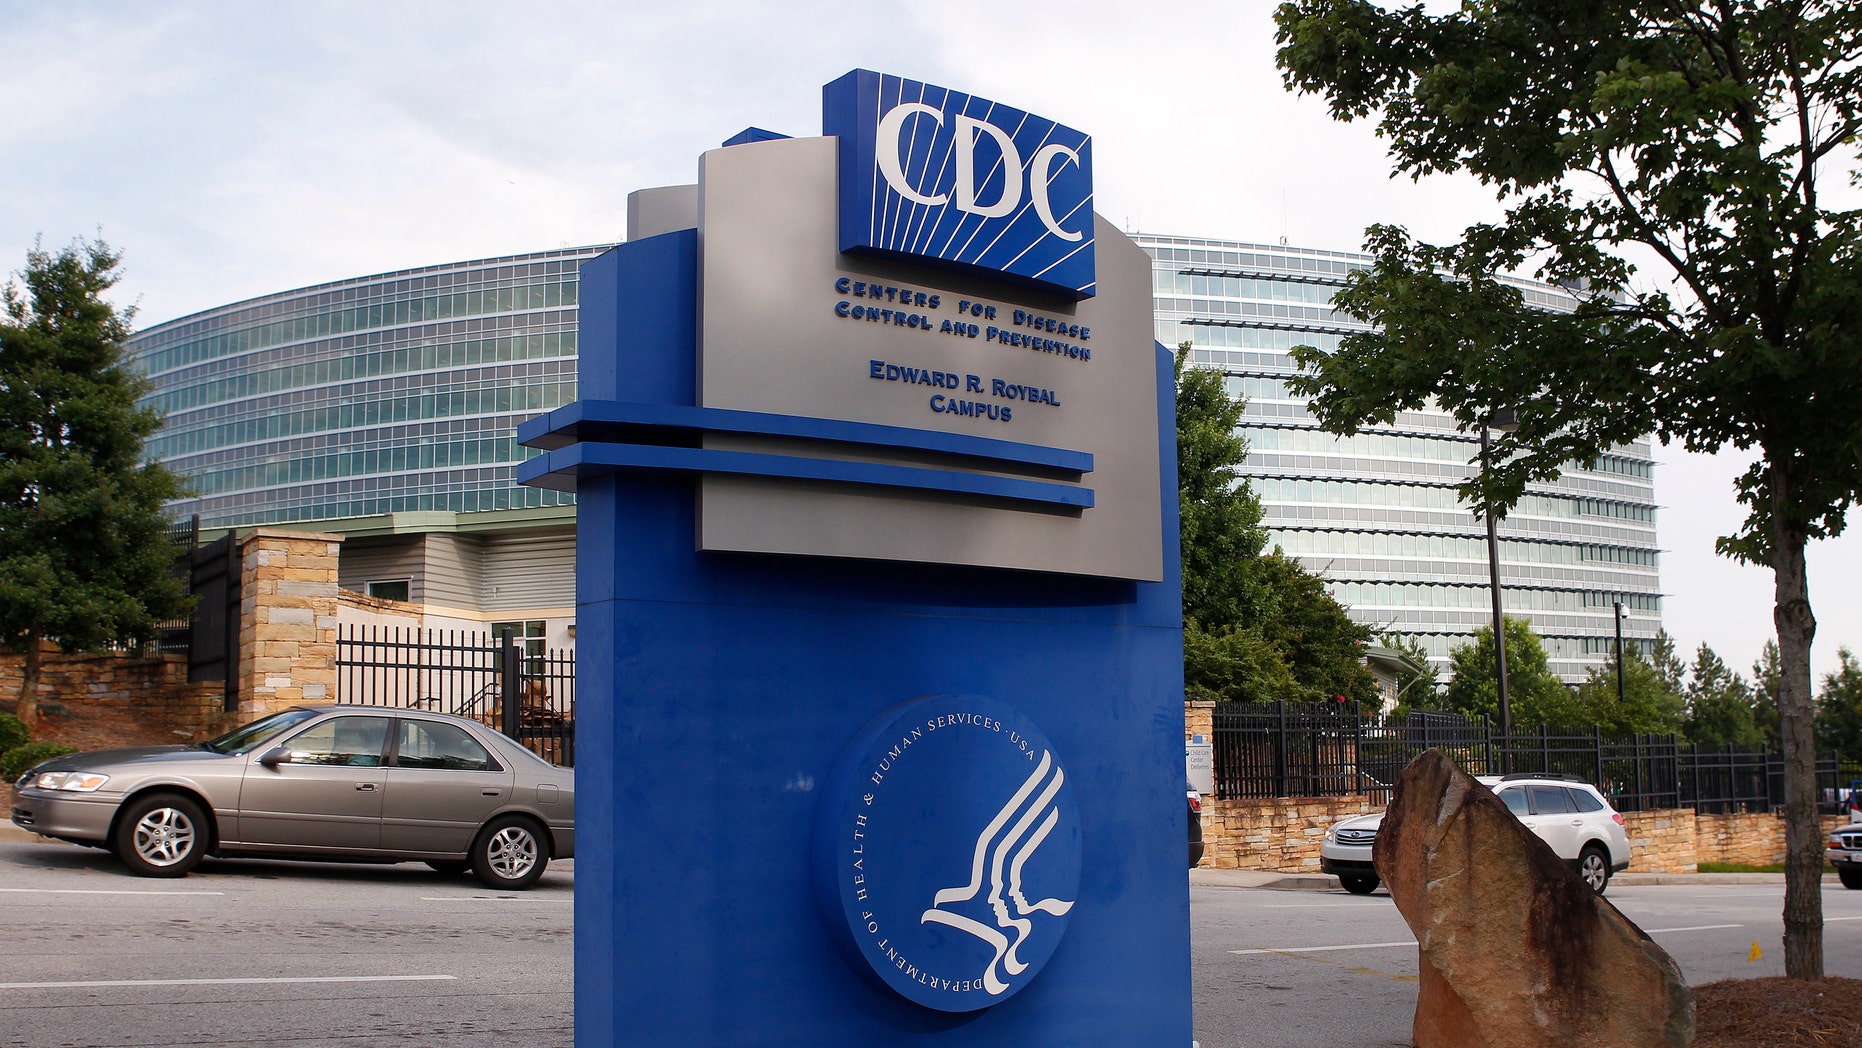 cdc-replaces-lab-director-after-bioterror-pathogen-incidents-fox-news